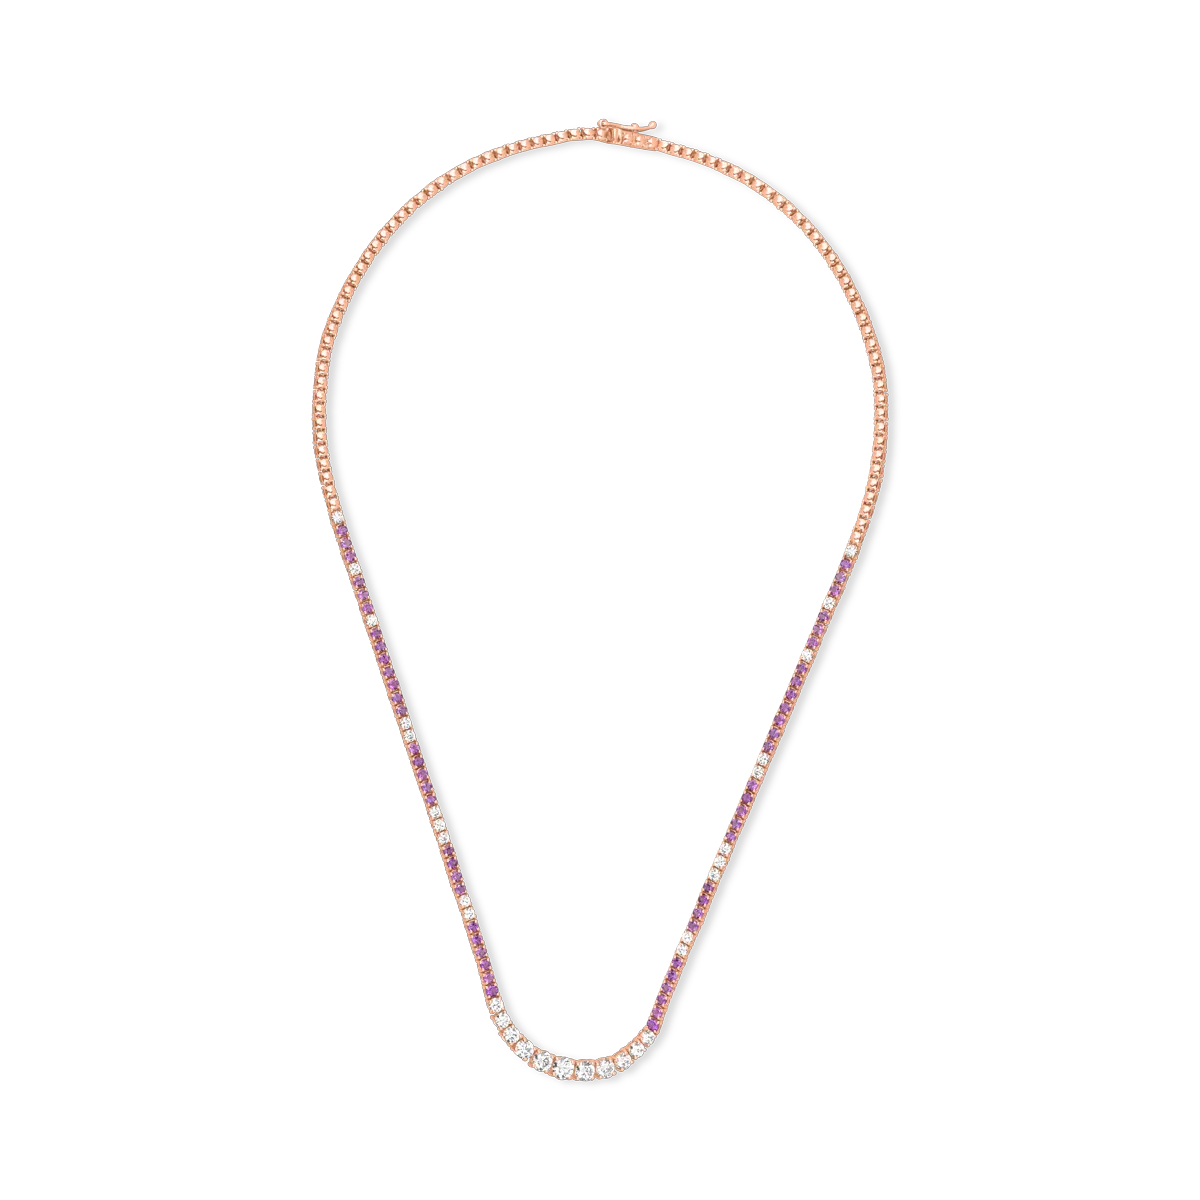 18K rose gold tennis necklace with 2.04ct diamonds and 1.87ct amethysts